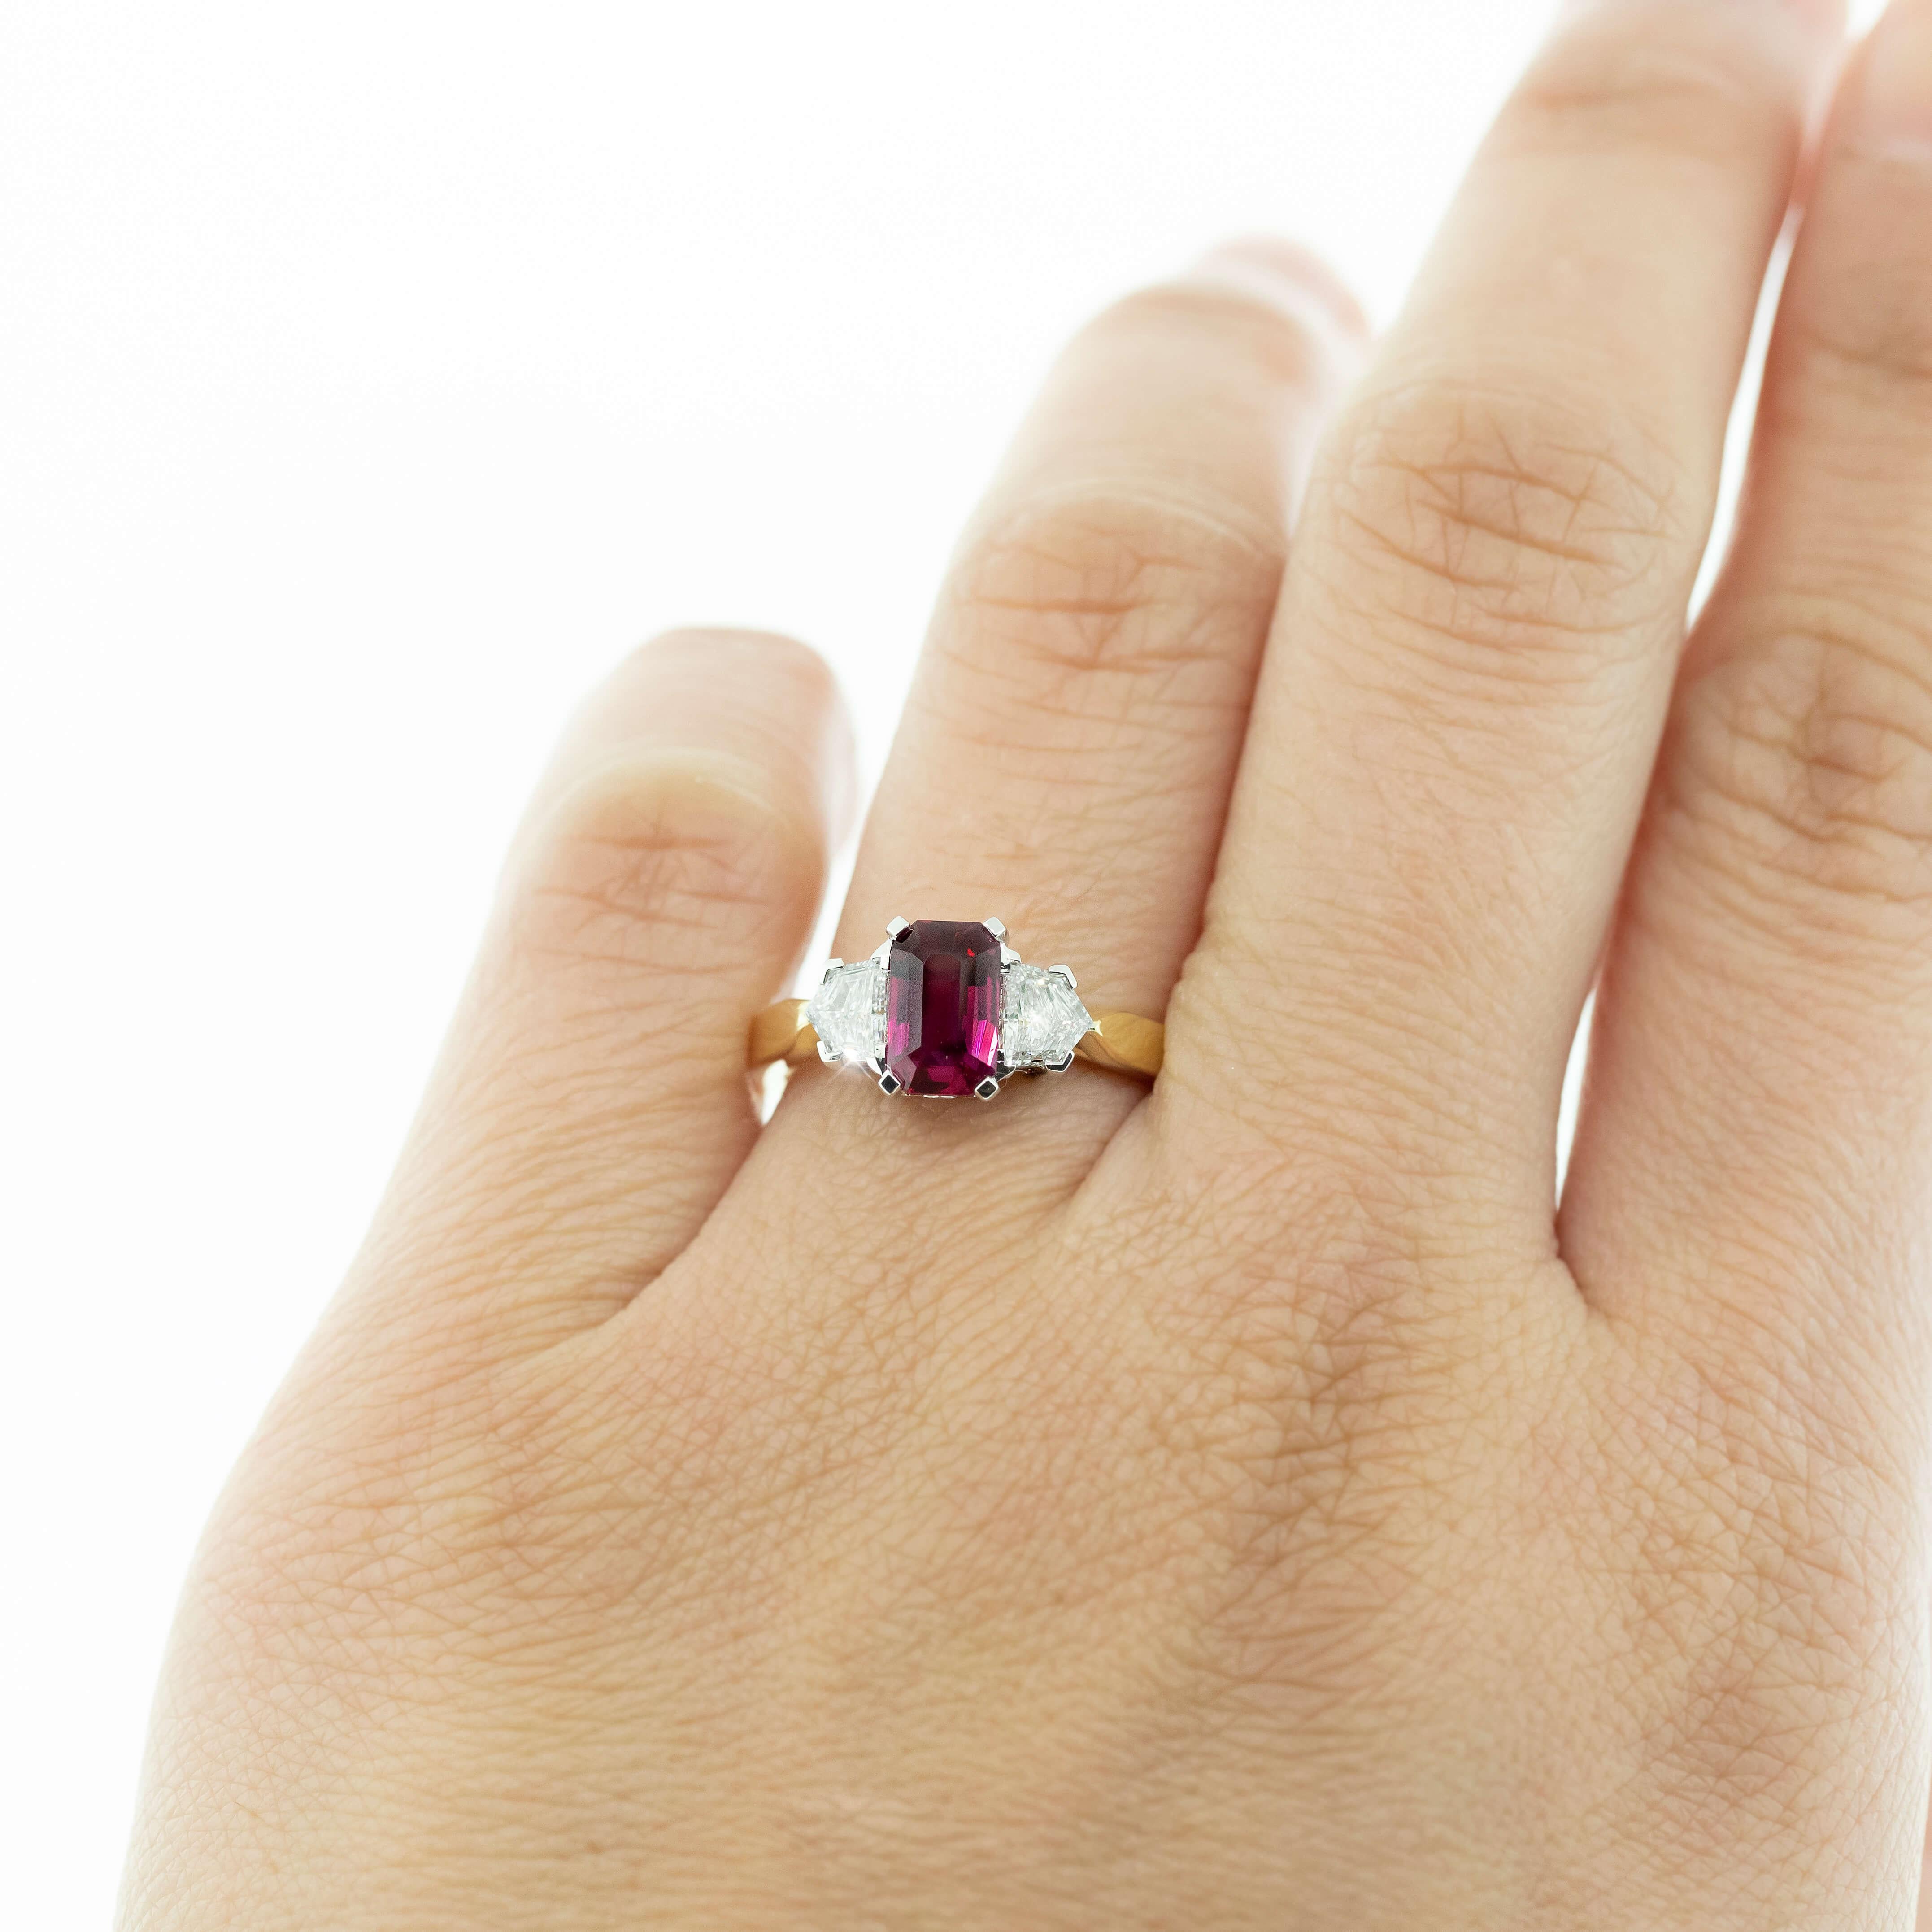 Aeon is a bold ring design that showcases exceptional colour and beauty. Each natural gemstone has been hand-selected for its impressive hue and is accented with complementary-shaped diamonds. Passion is woven into the very foundation of this